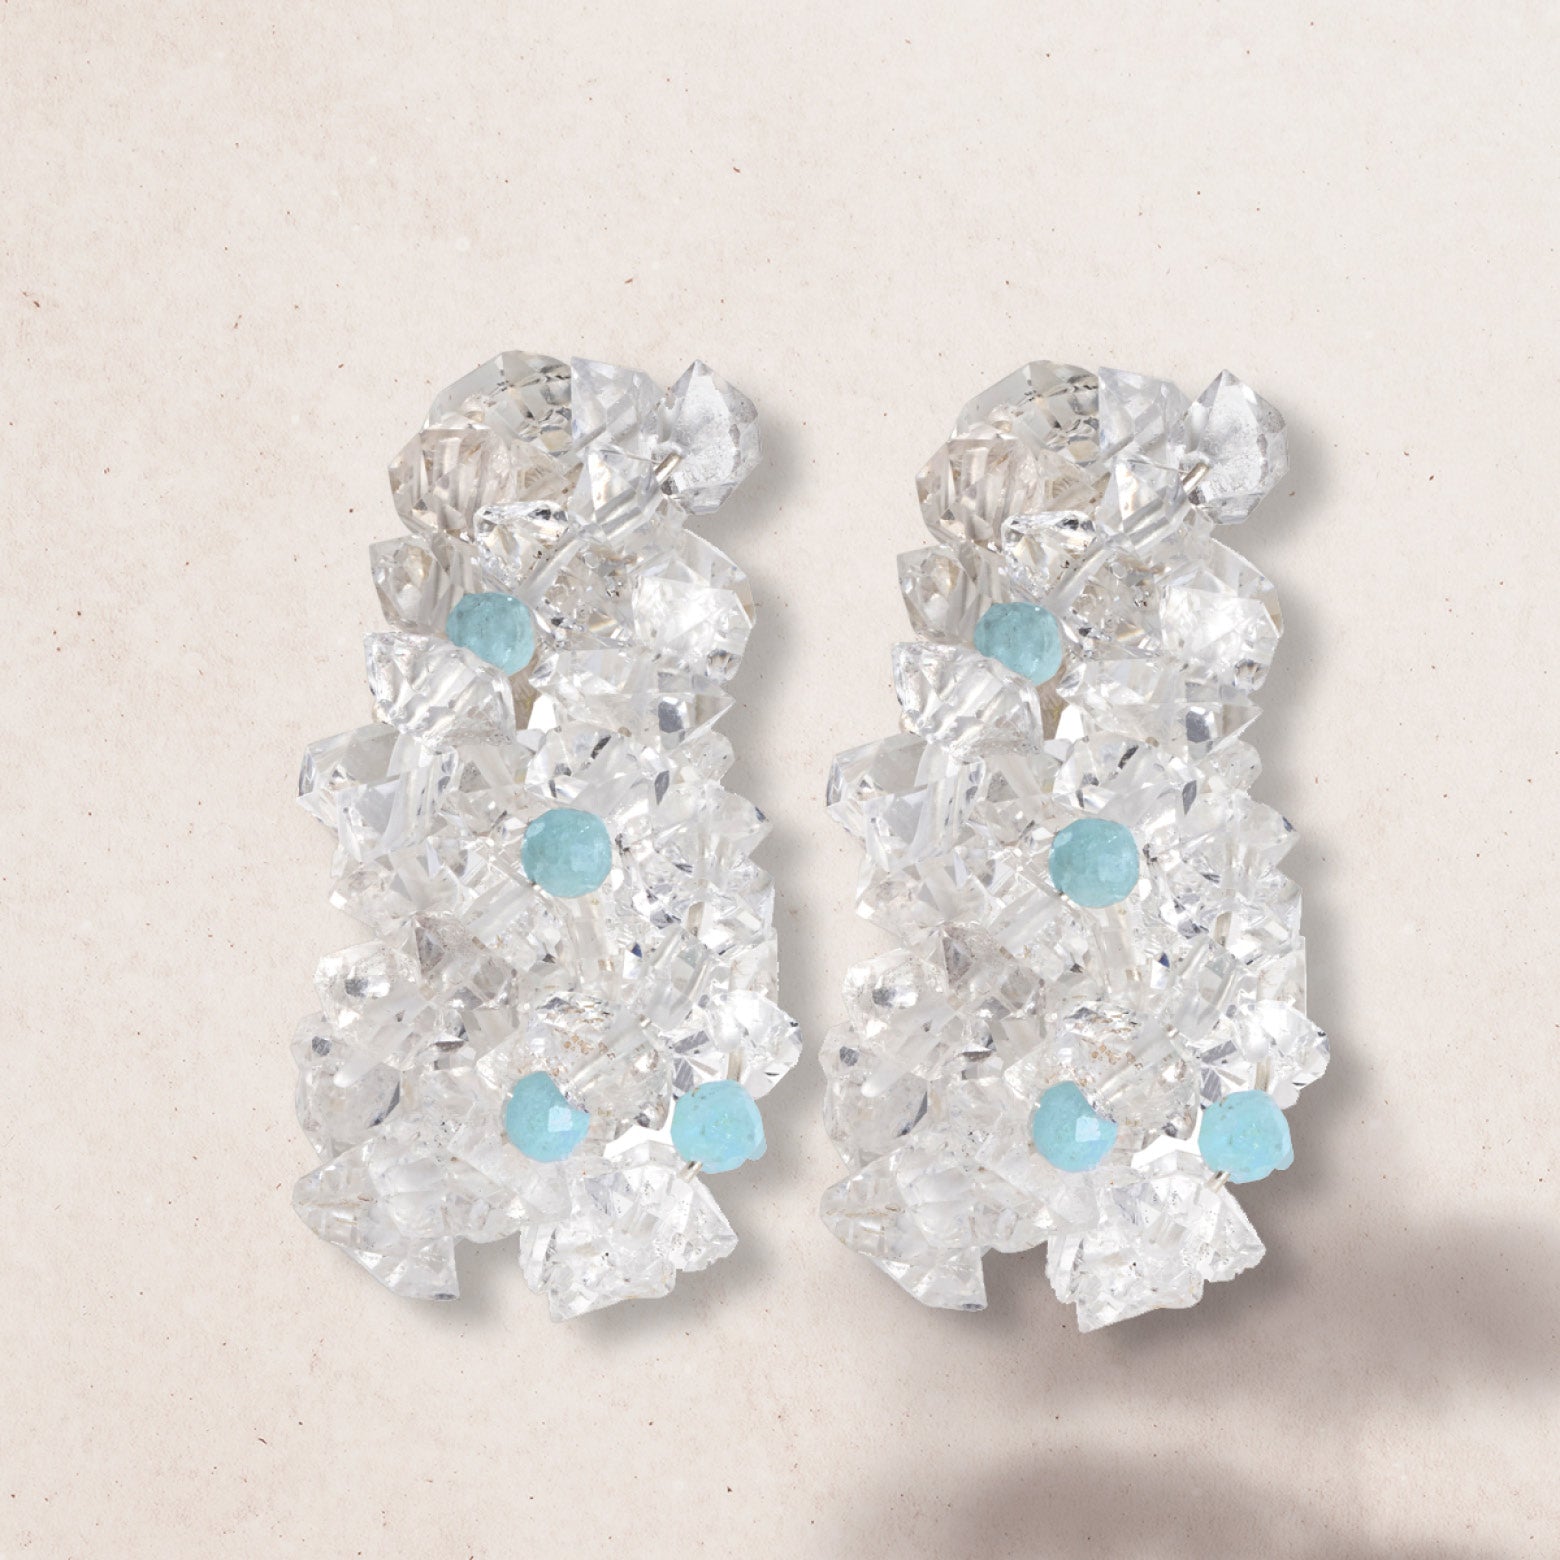 Flat lay of cluster drop earrings of aquamarine and herkimer diamonds